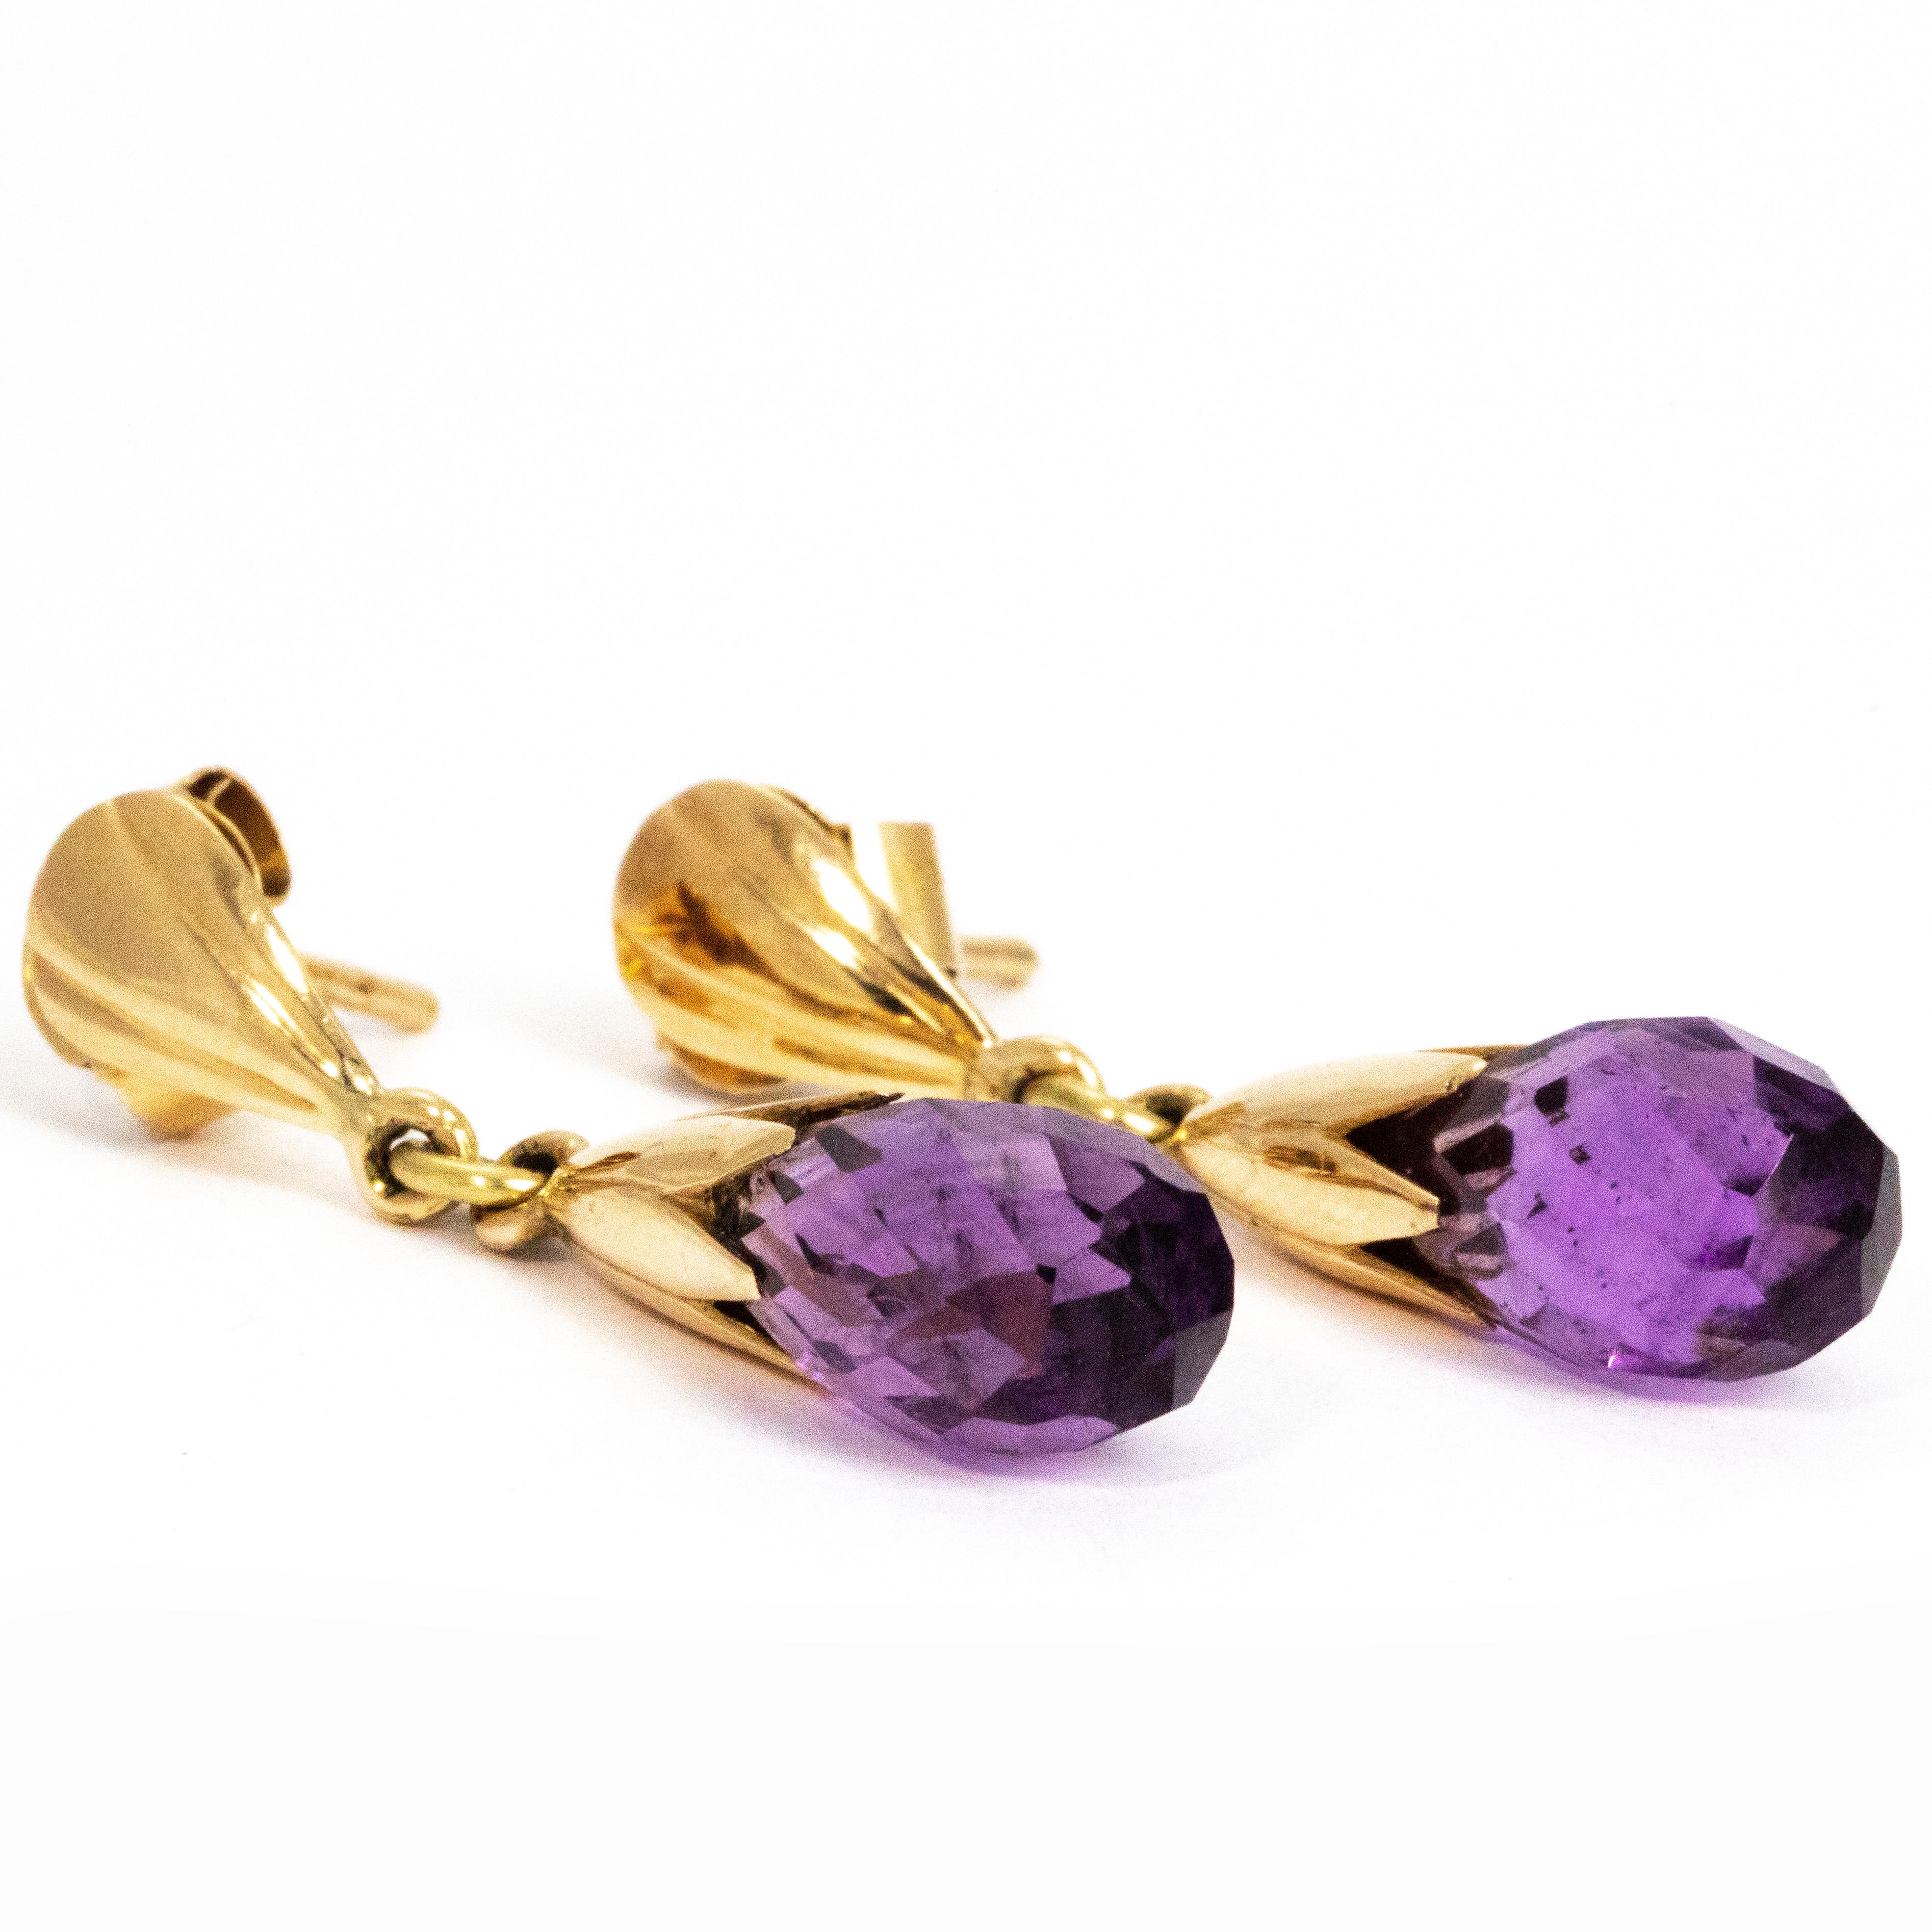 The way these drop earrings glisten in the light is stunning. The bright purple amethyst is such a gorgeous colour and is complemented by the glossy gold. The scalloped stud that holds the amethyst add a lovely bit of detail. 

Drop Length: 32mm